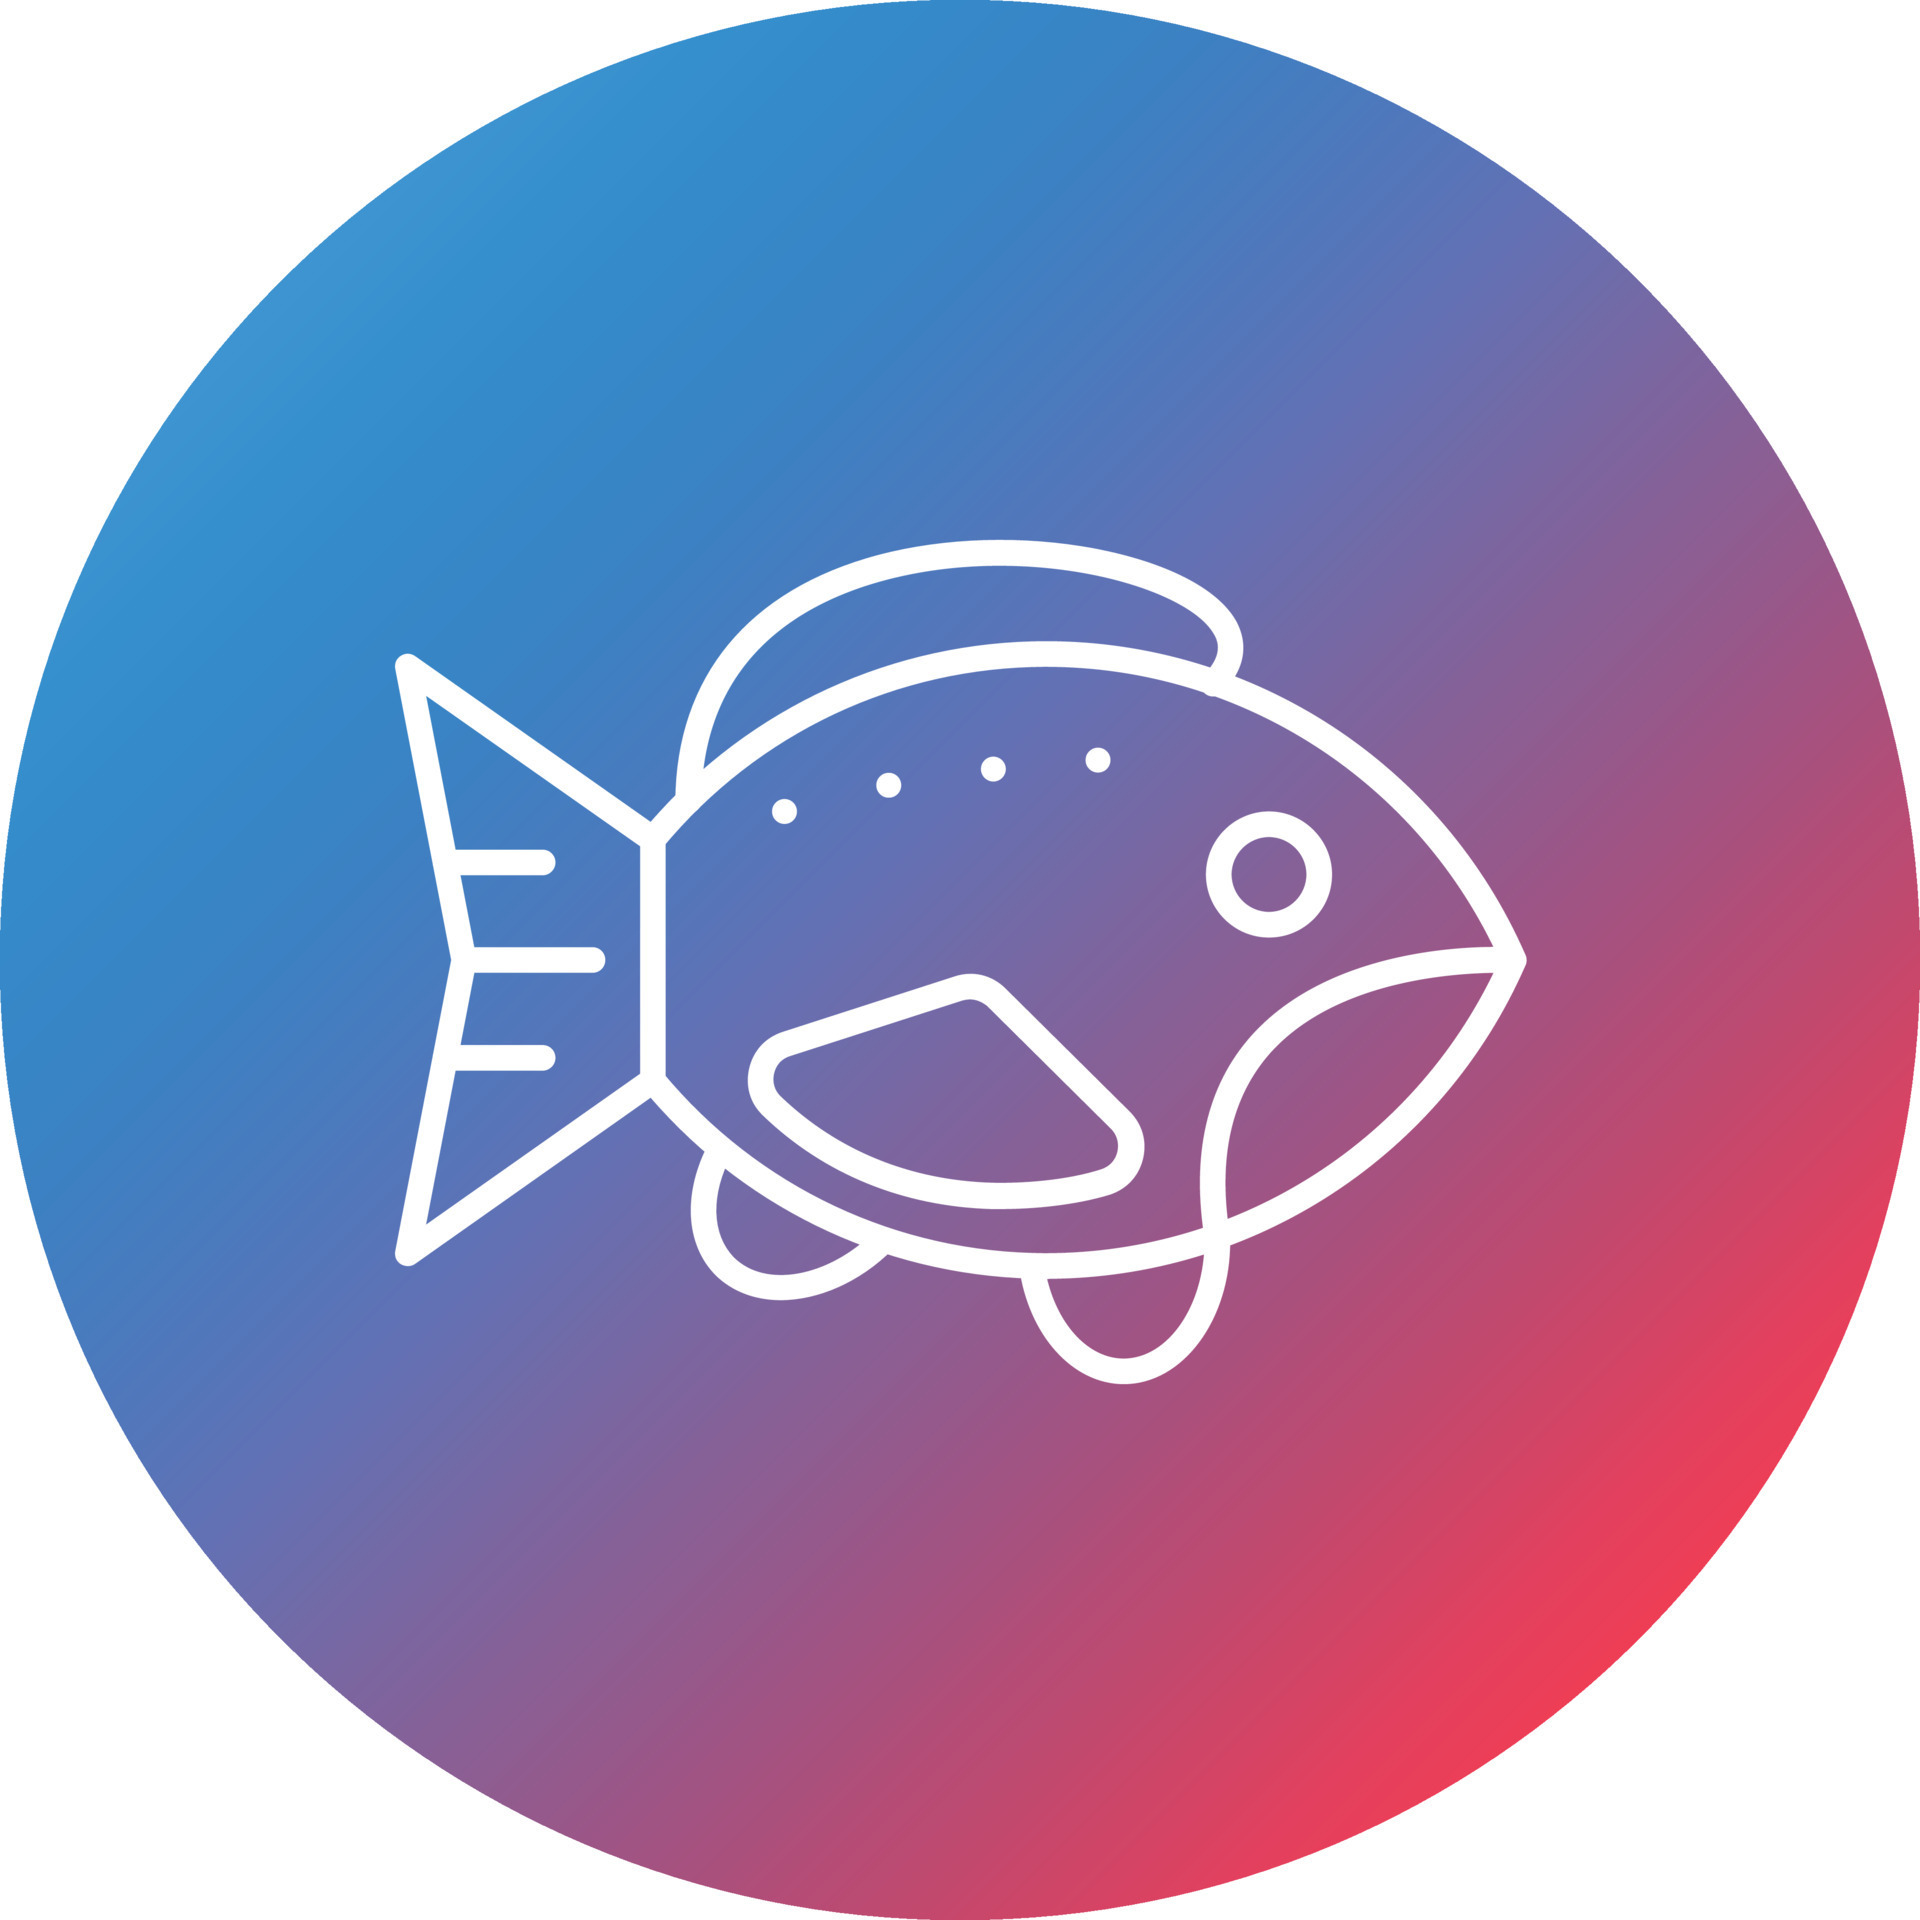 https://static.vecteezy.com/system/resources/previews/016/808/924/original/trout-line-gradient-circle-background-icon-vector.jpg